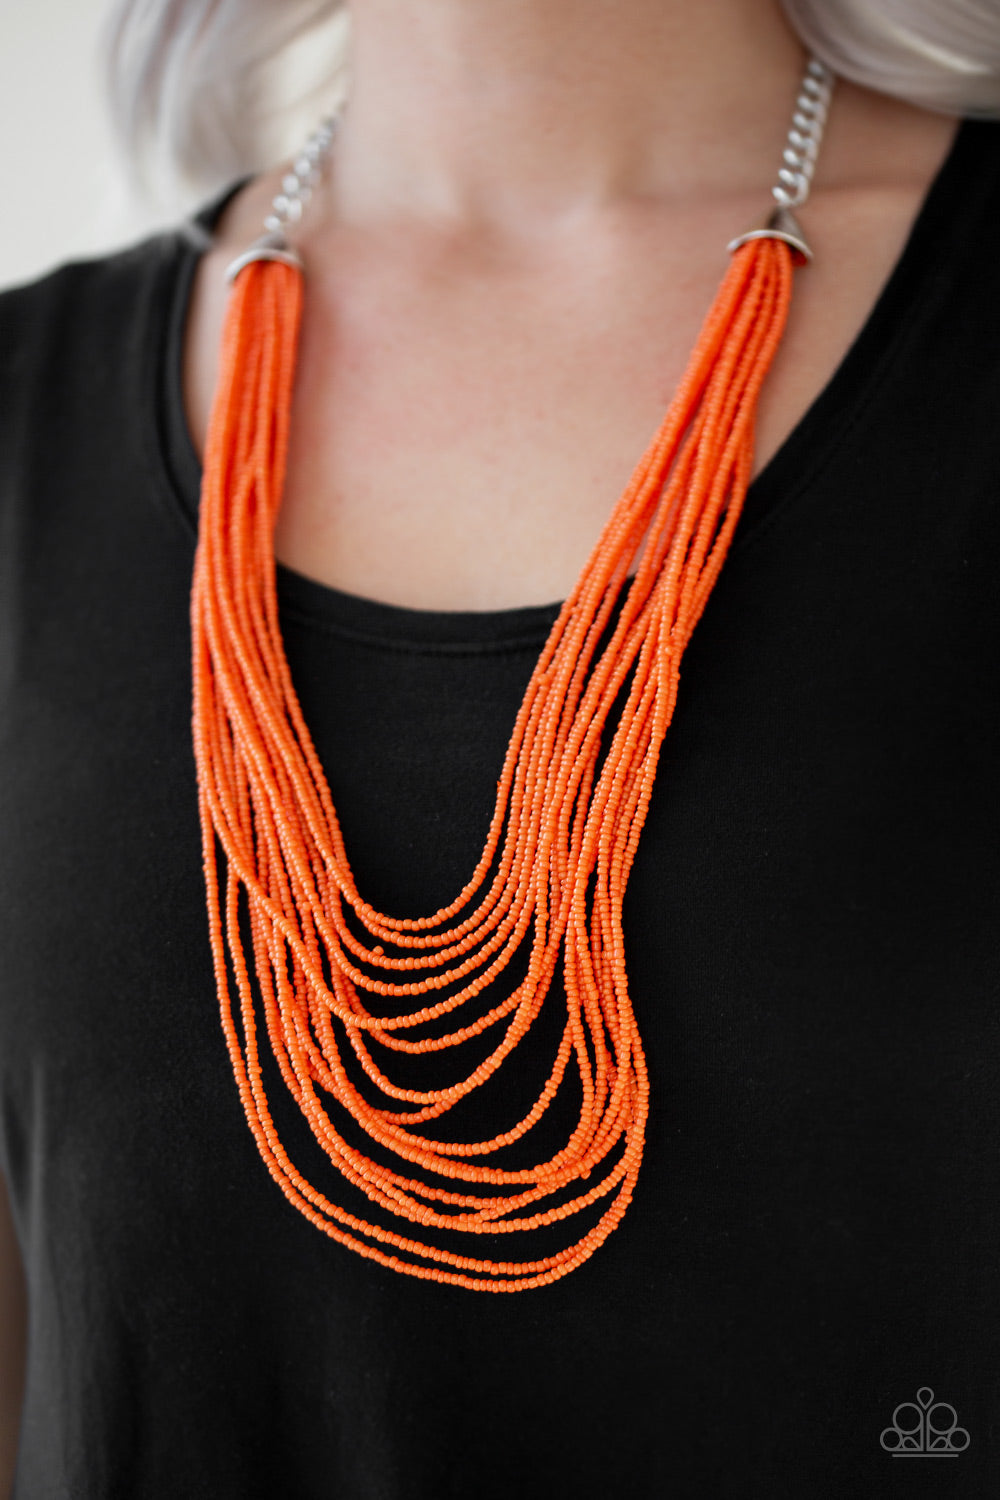 Paparazzi Peacefully Pacific - Orange Seed Beads Necklace & Earrings - $5 Jewelry with Ashley Swint